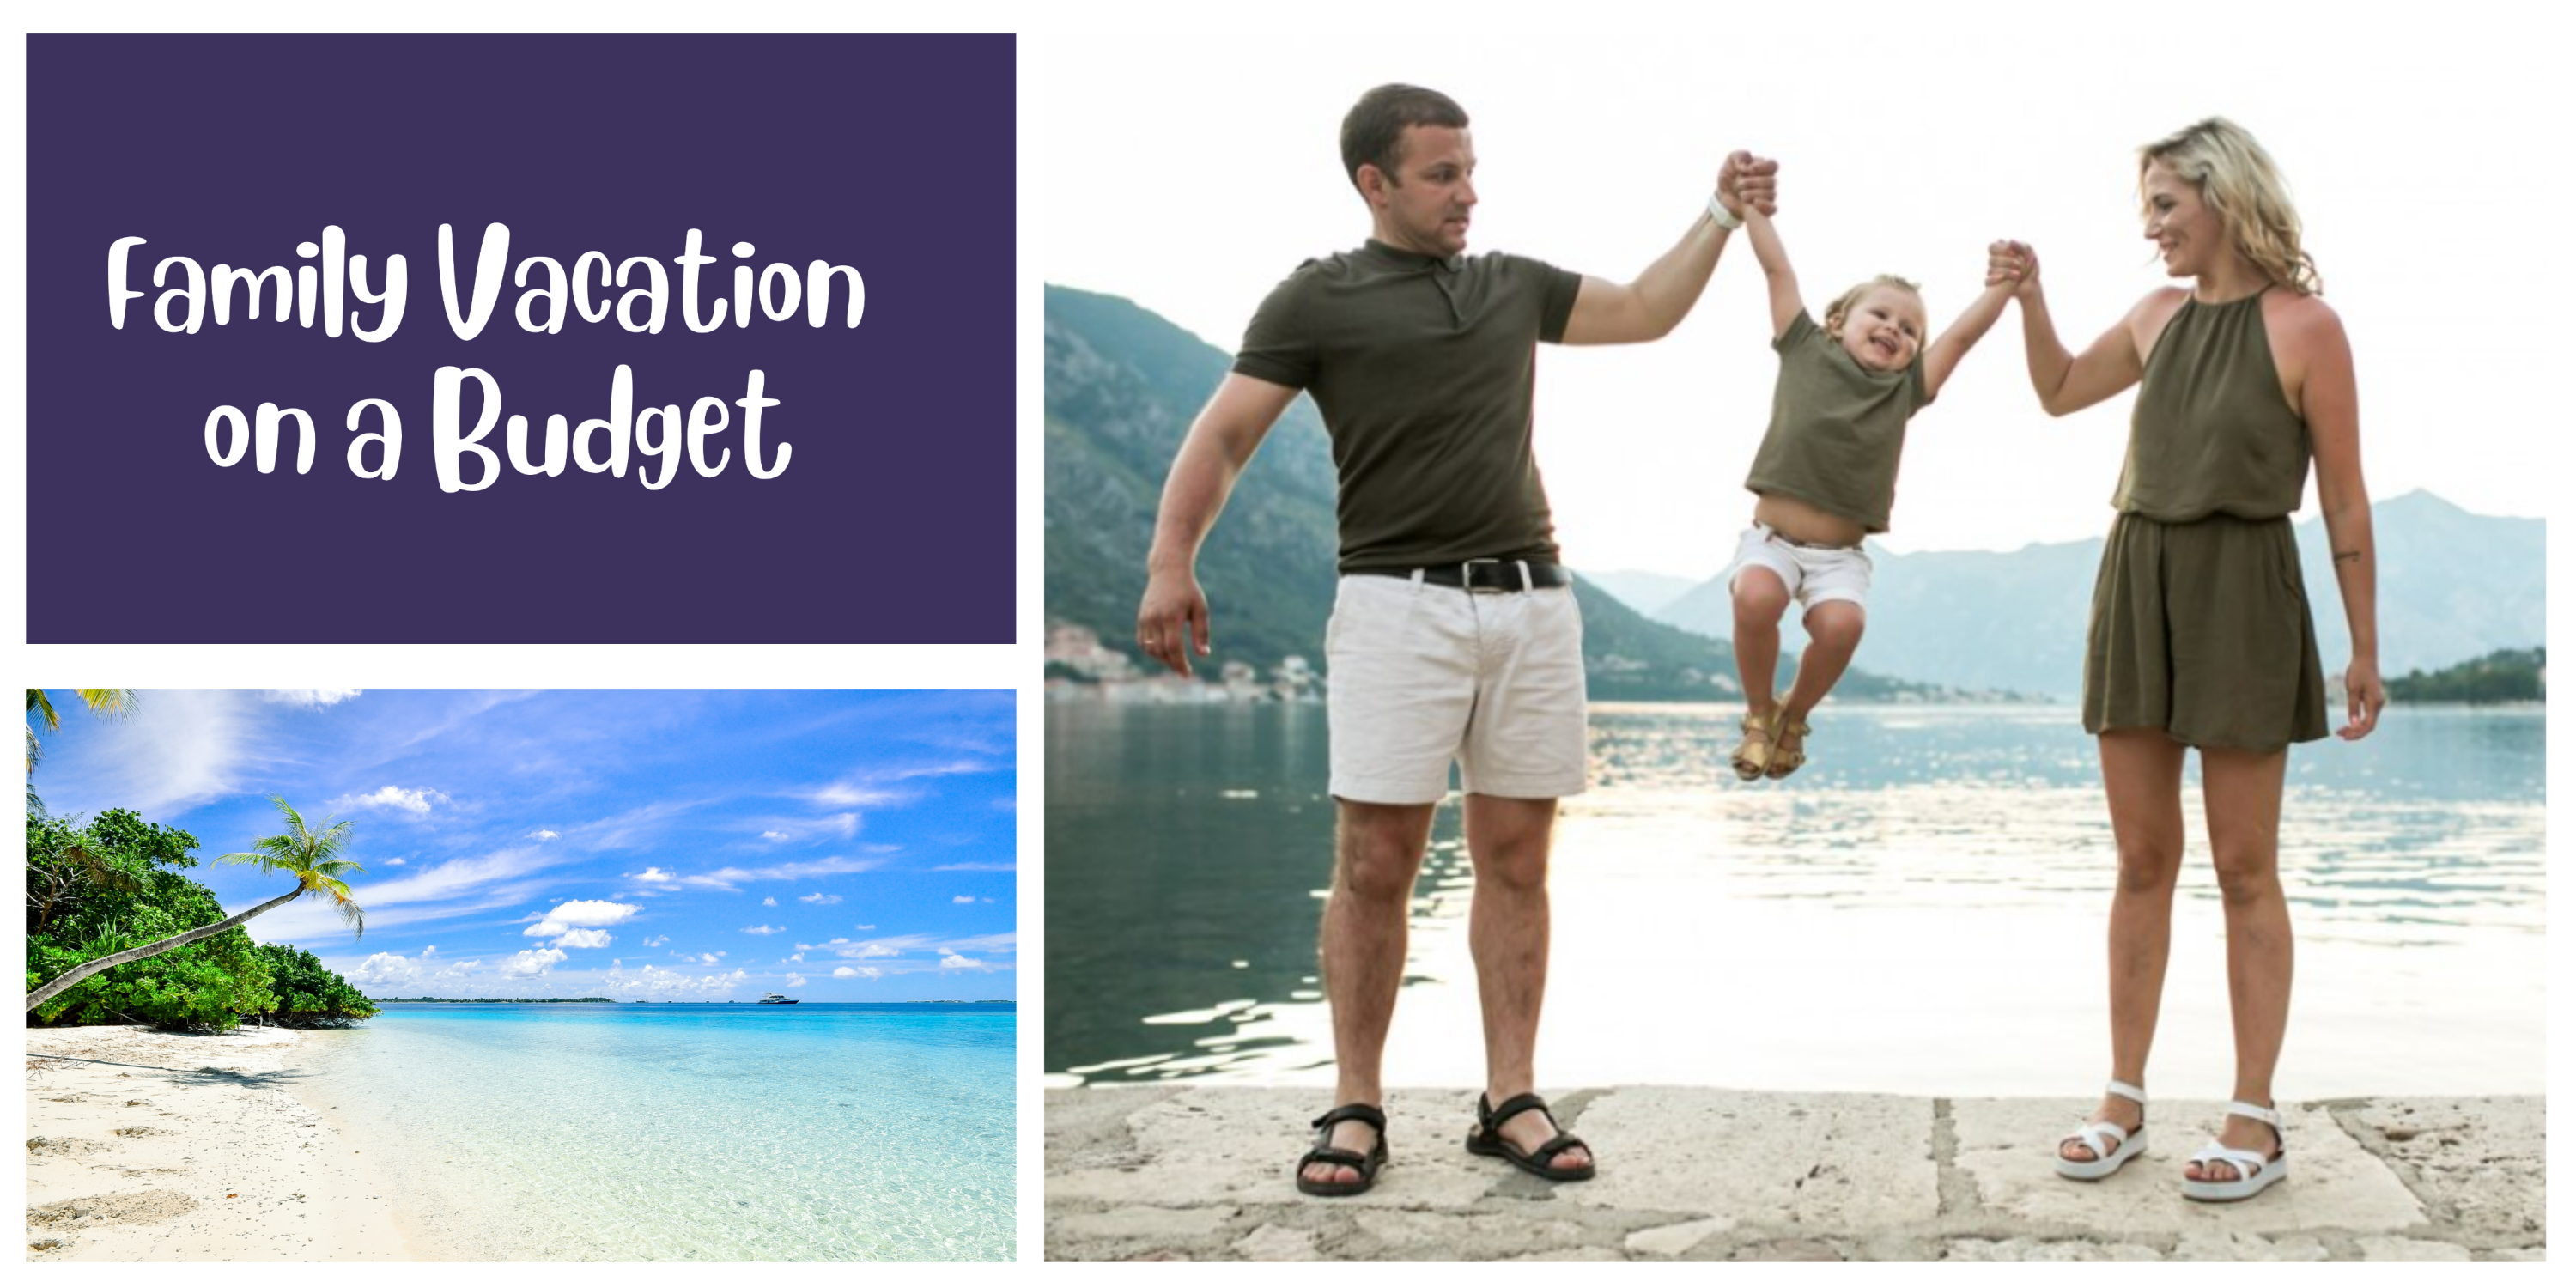 How to Plan a Family Vacation on a Budget?